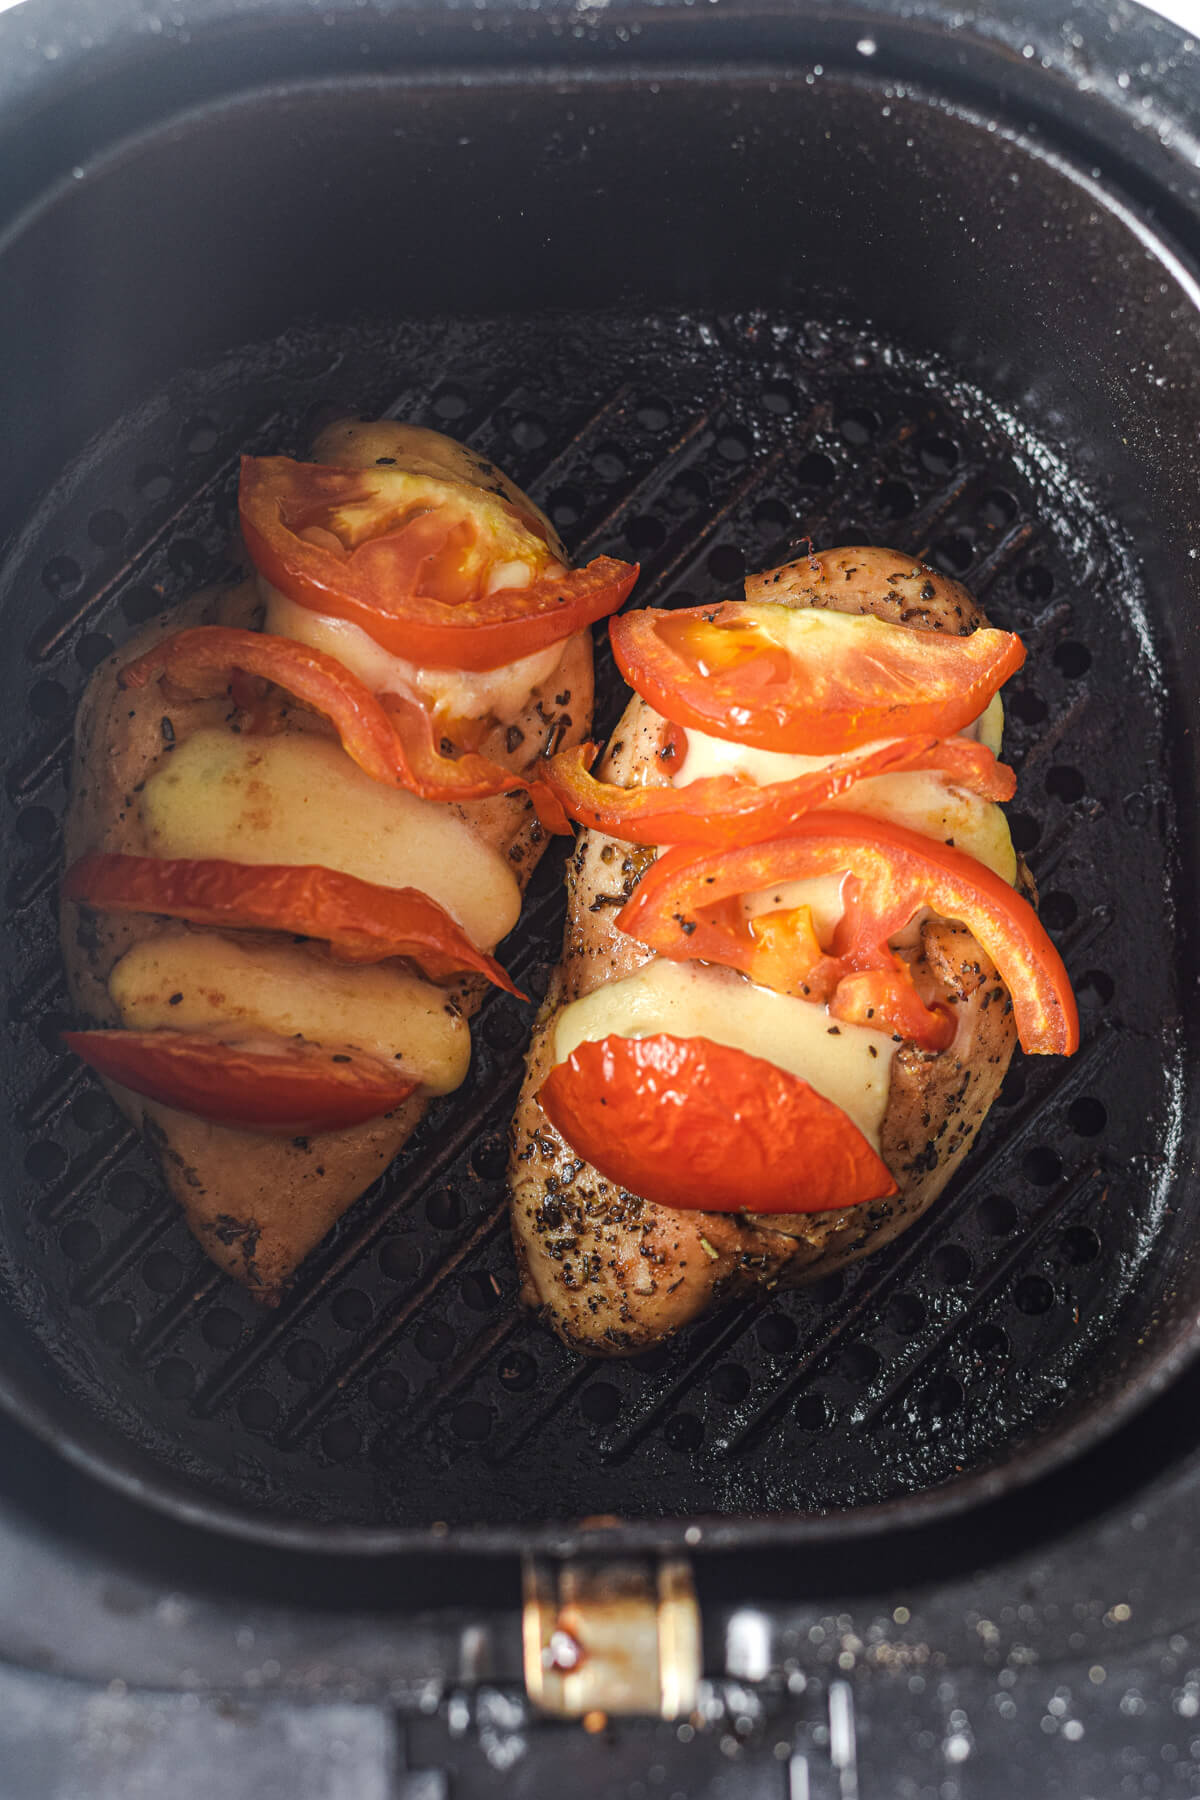 Two cooked chicken breasts stuffed with tomato and mozzarella slices in an air fryer.